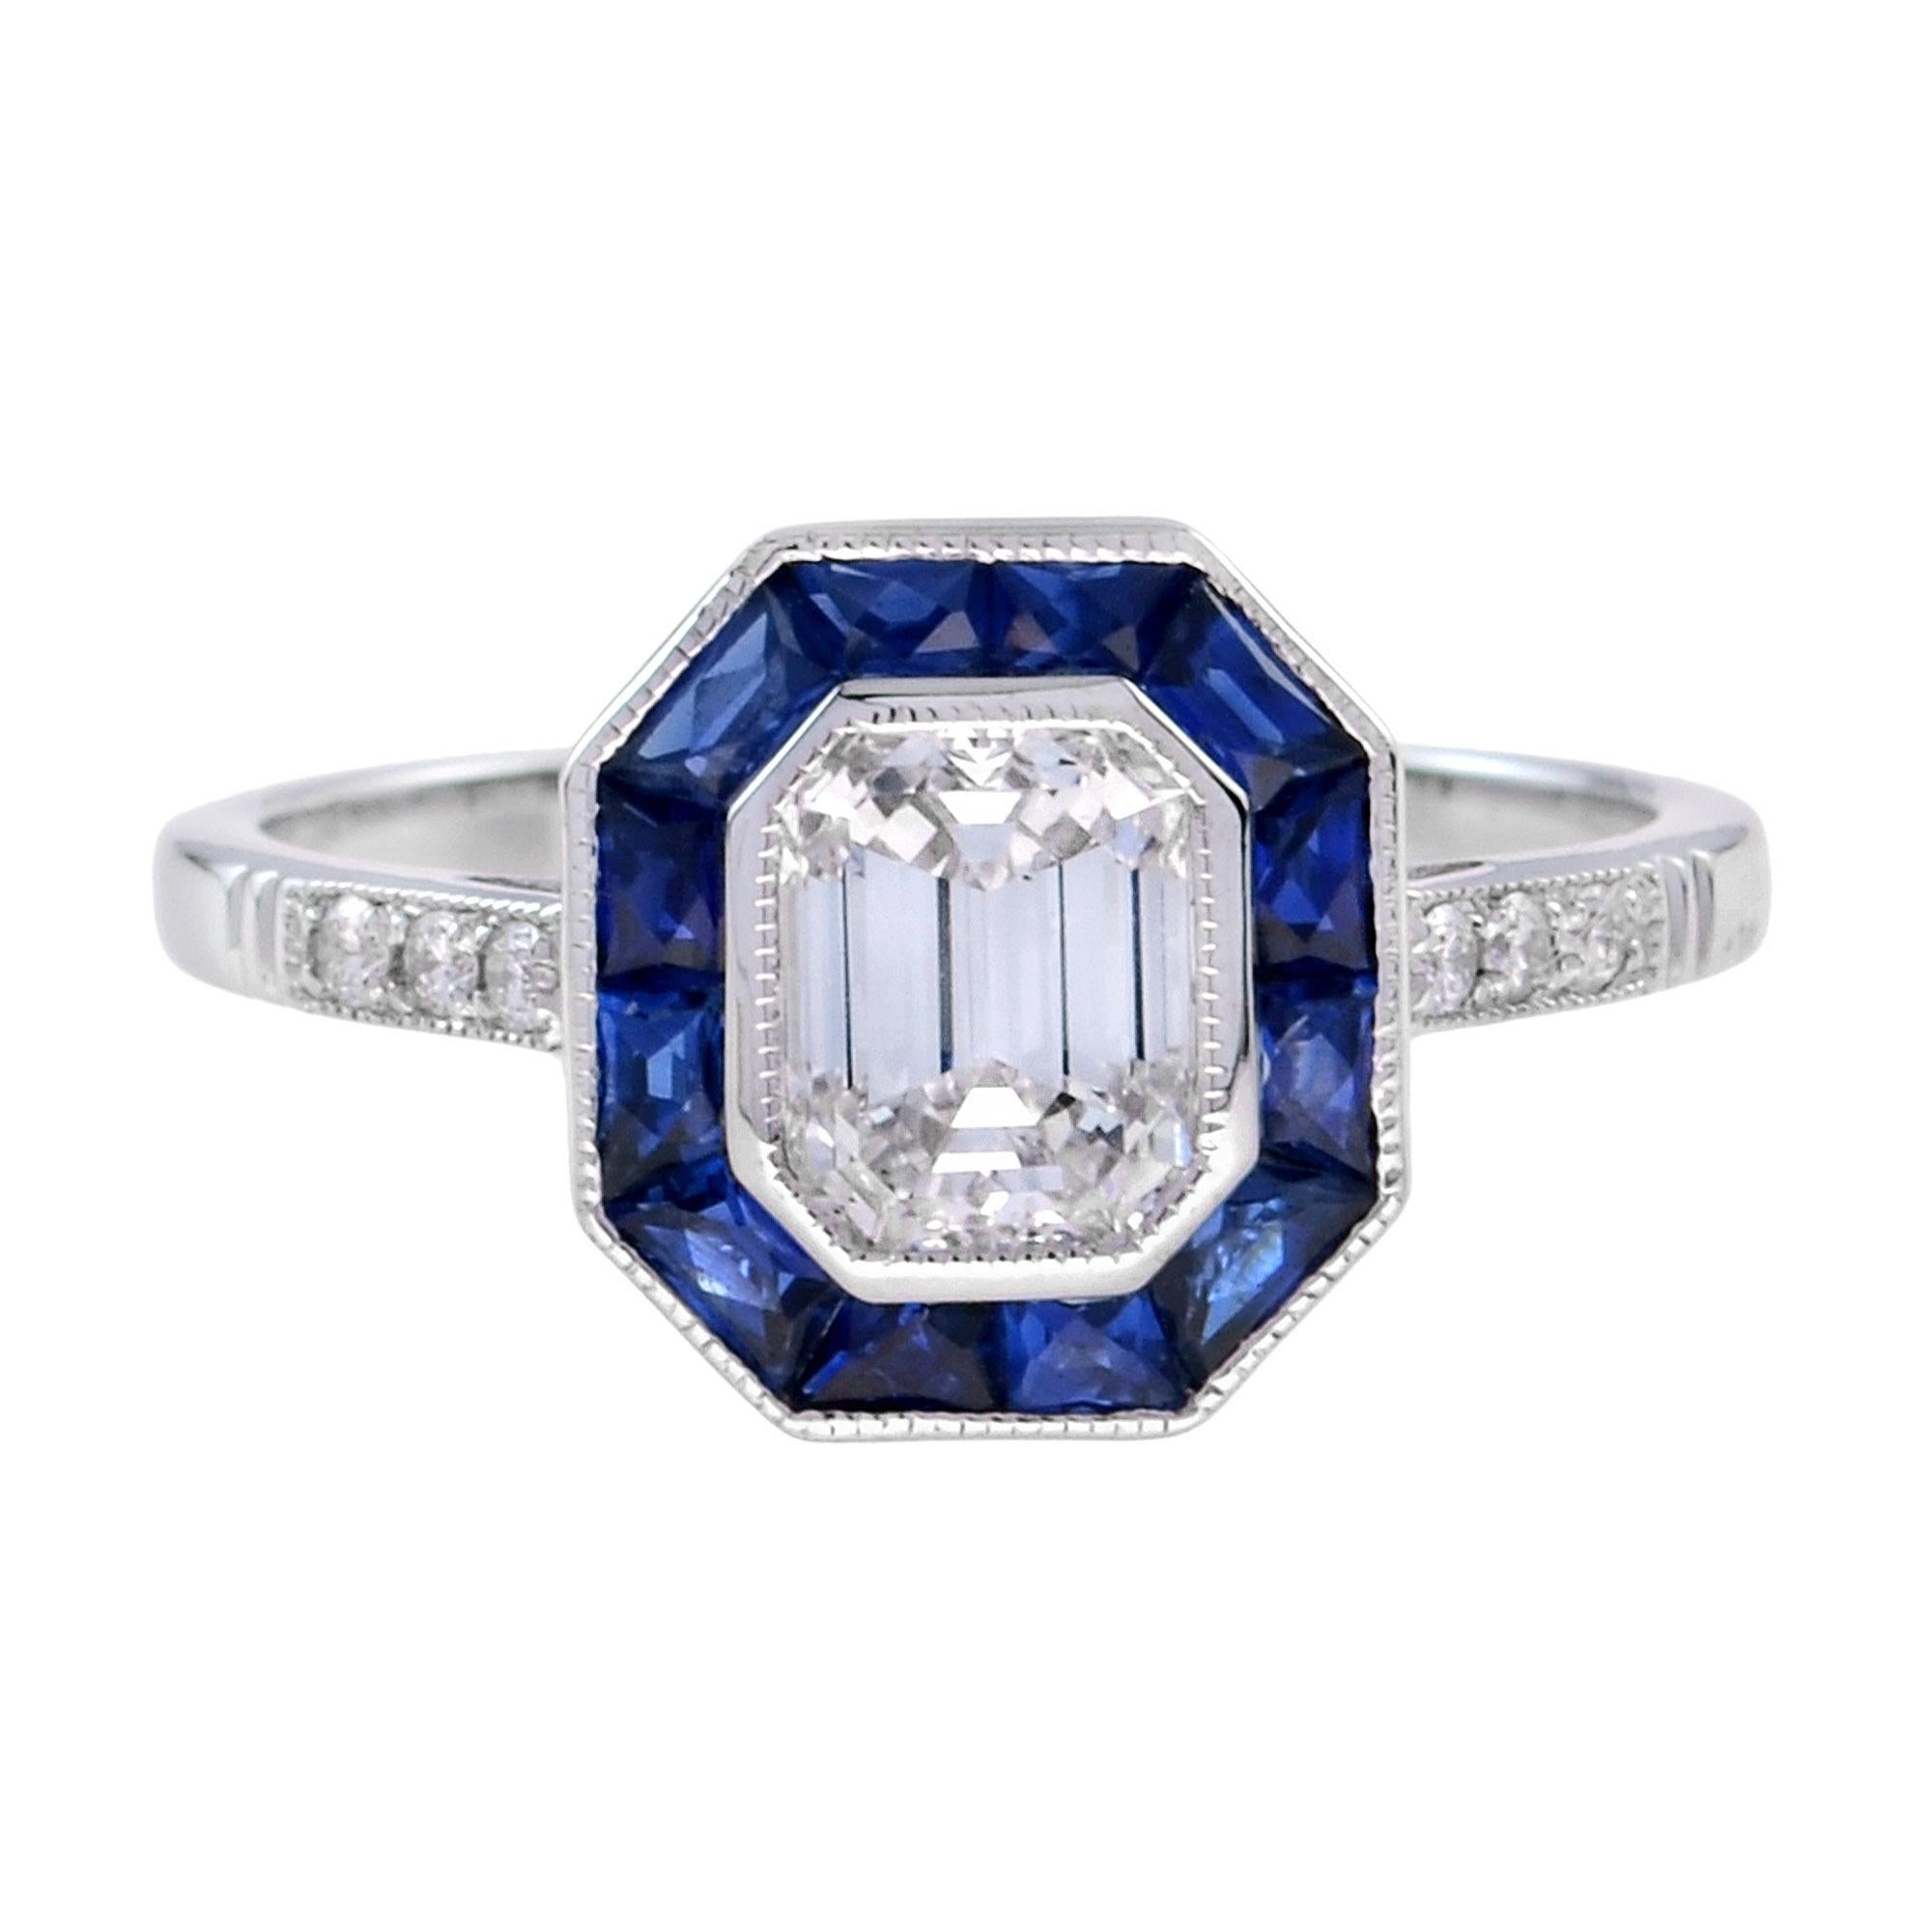 A stunning diamond and sapphire ring, centered with a beautiful emerald cut GIA certified diamond setting surrounded by a fine geometric frame of French cut sapphires and with diamond set shoulders, all in a finely hand-crafted 18K white gold mount